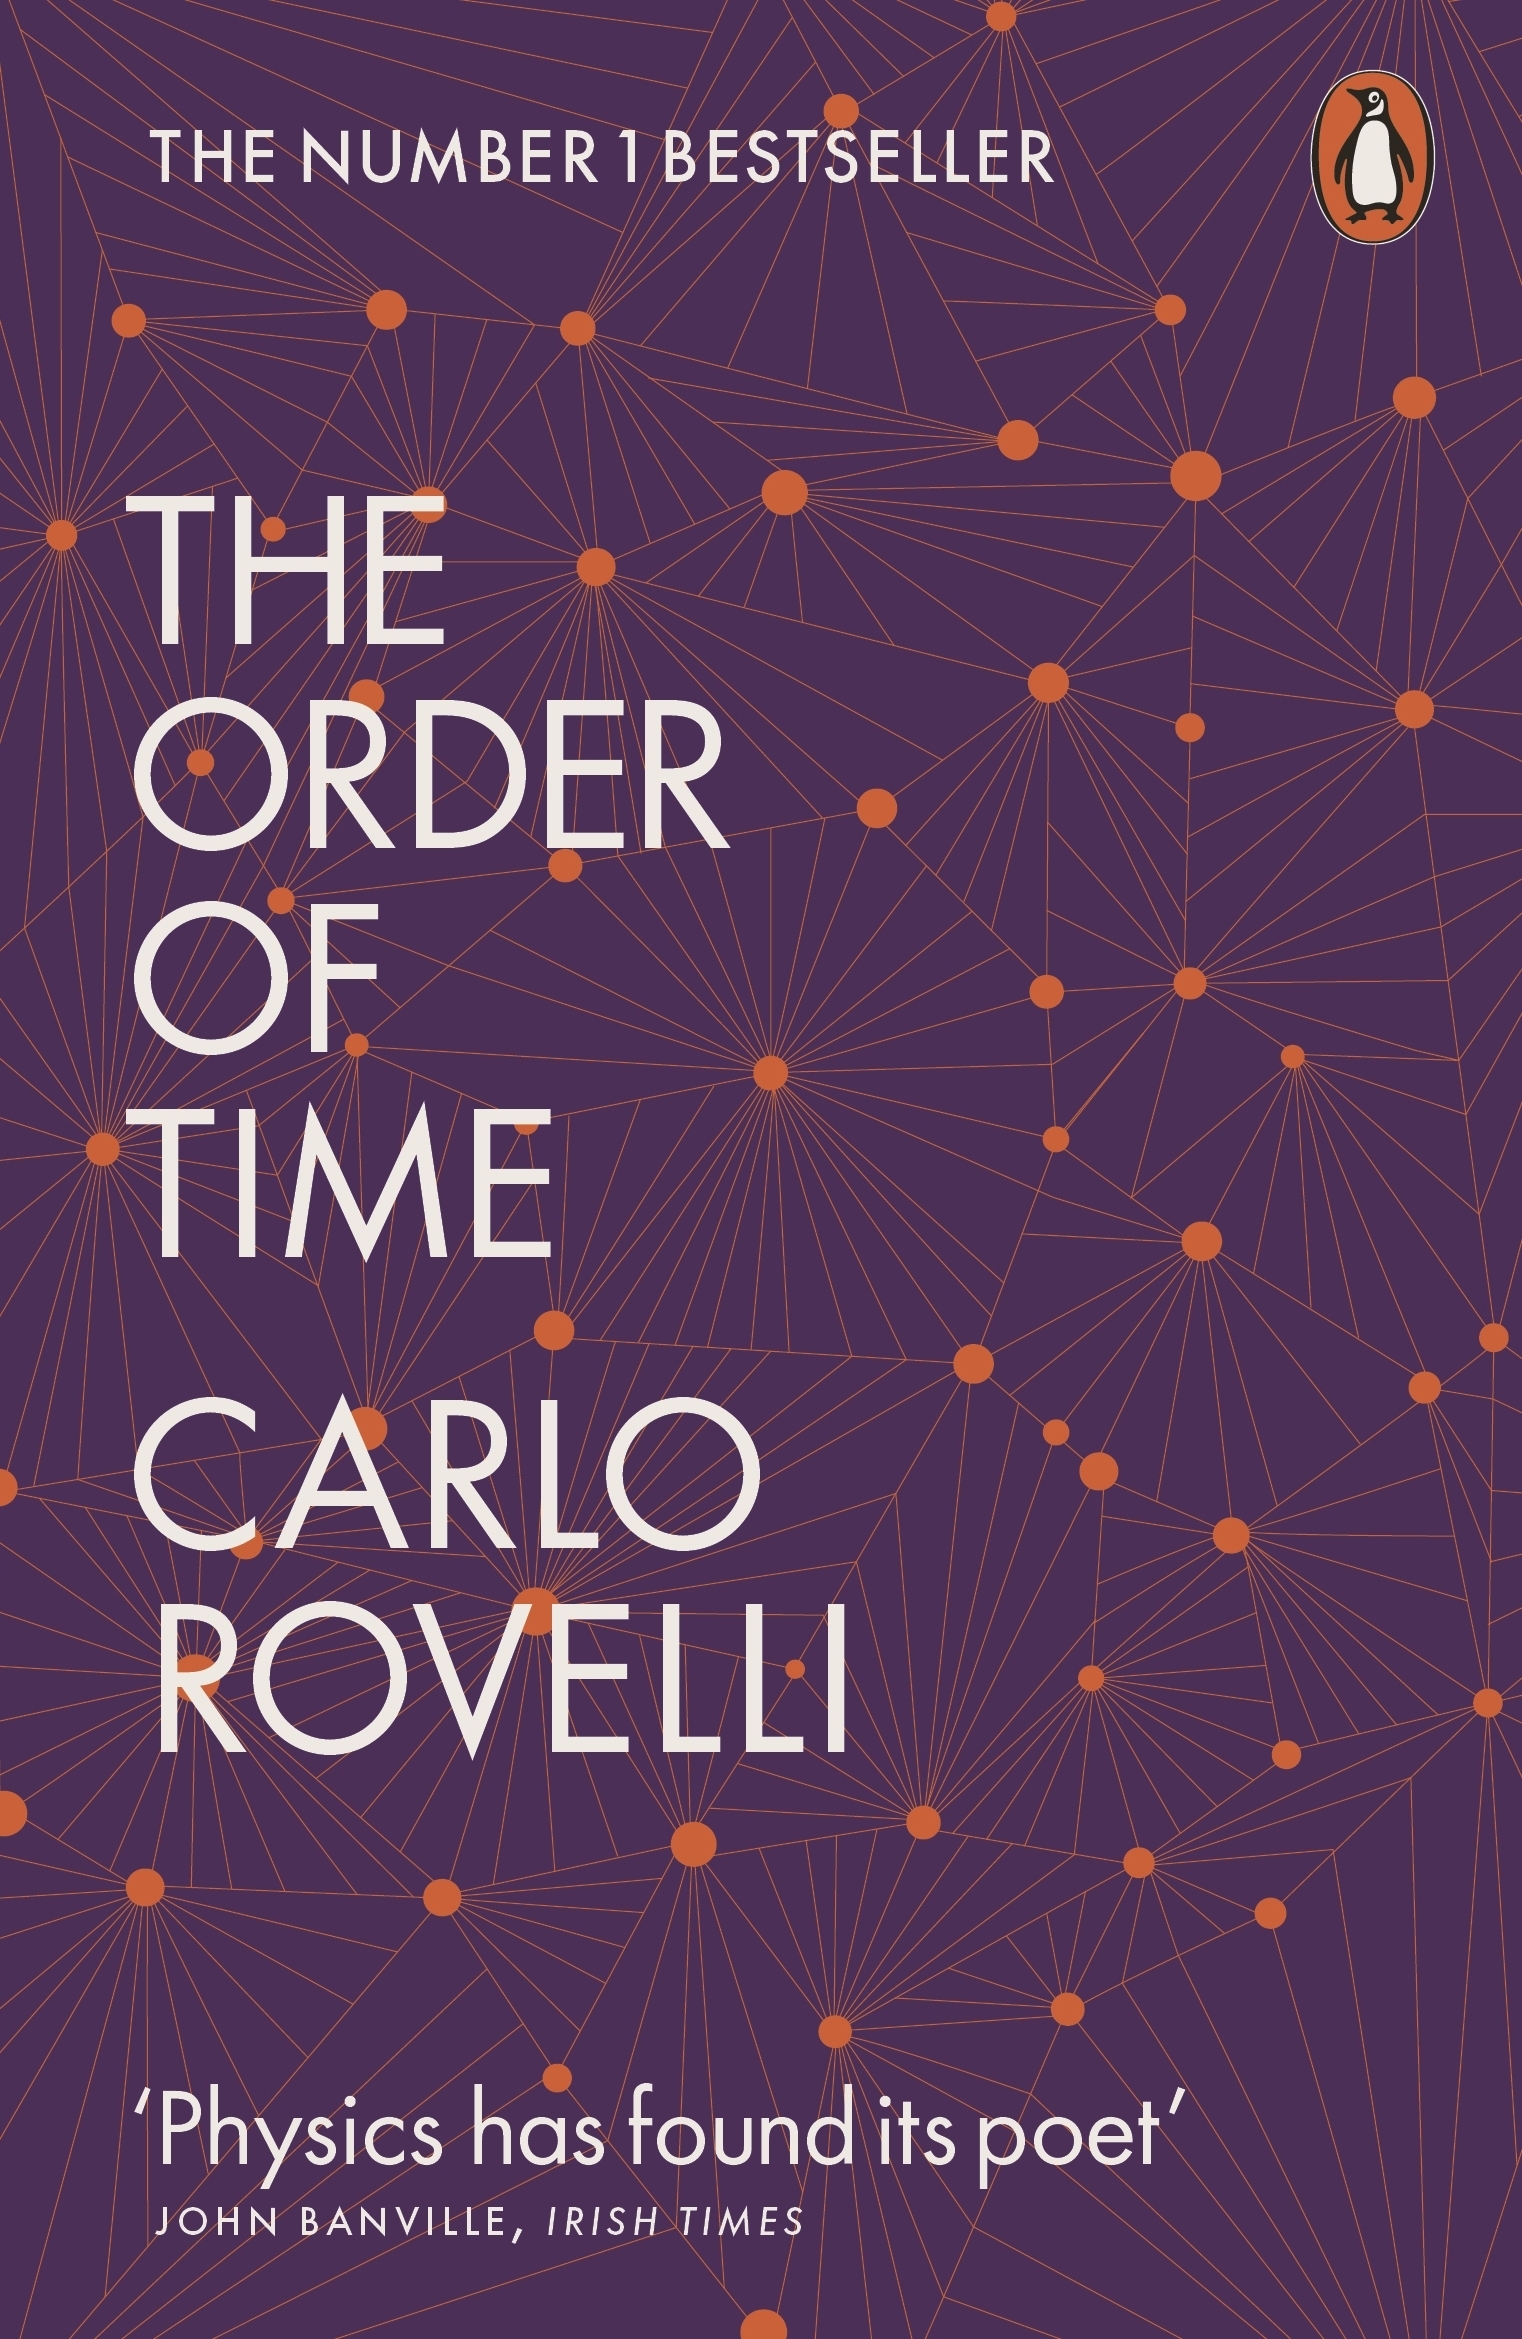 Carlo Rovelli on his search for the theory of everything